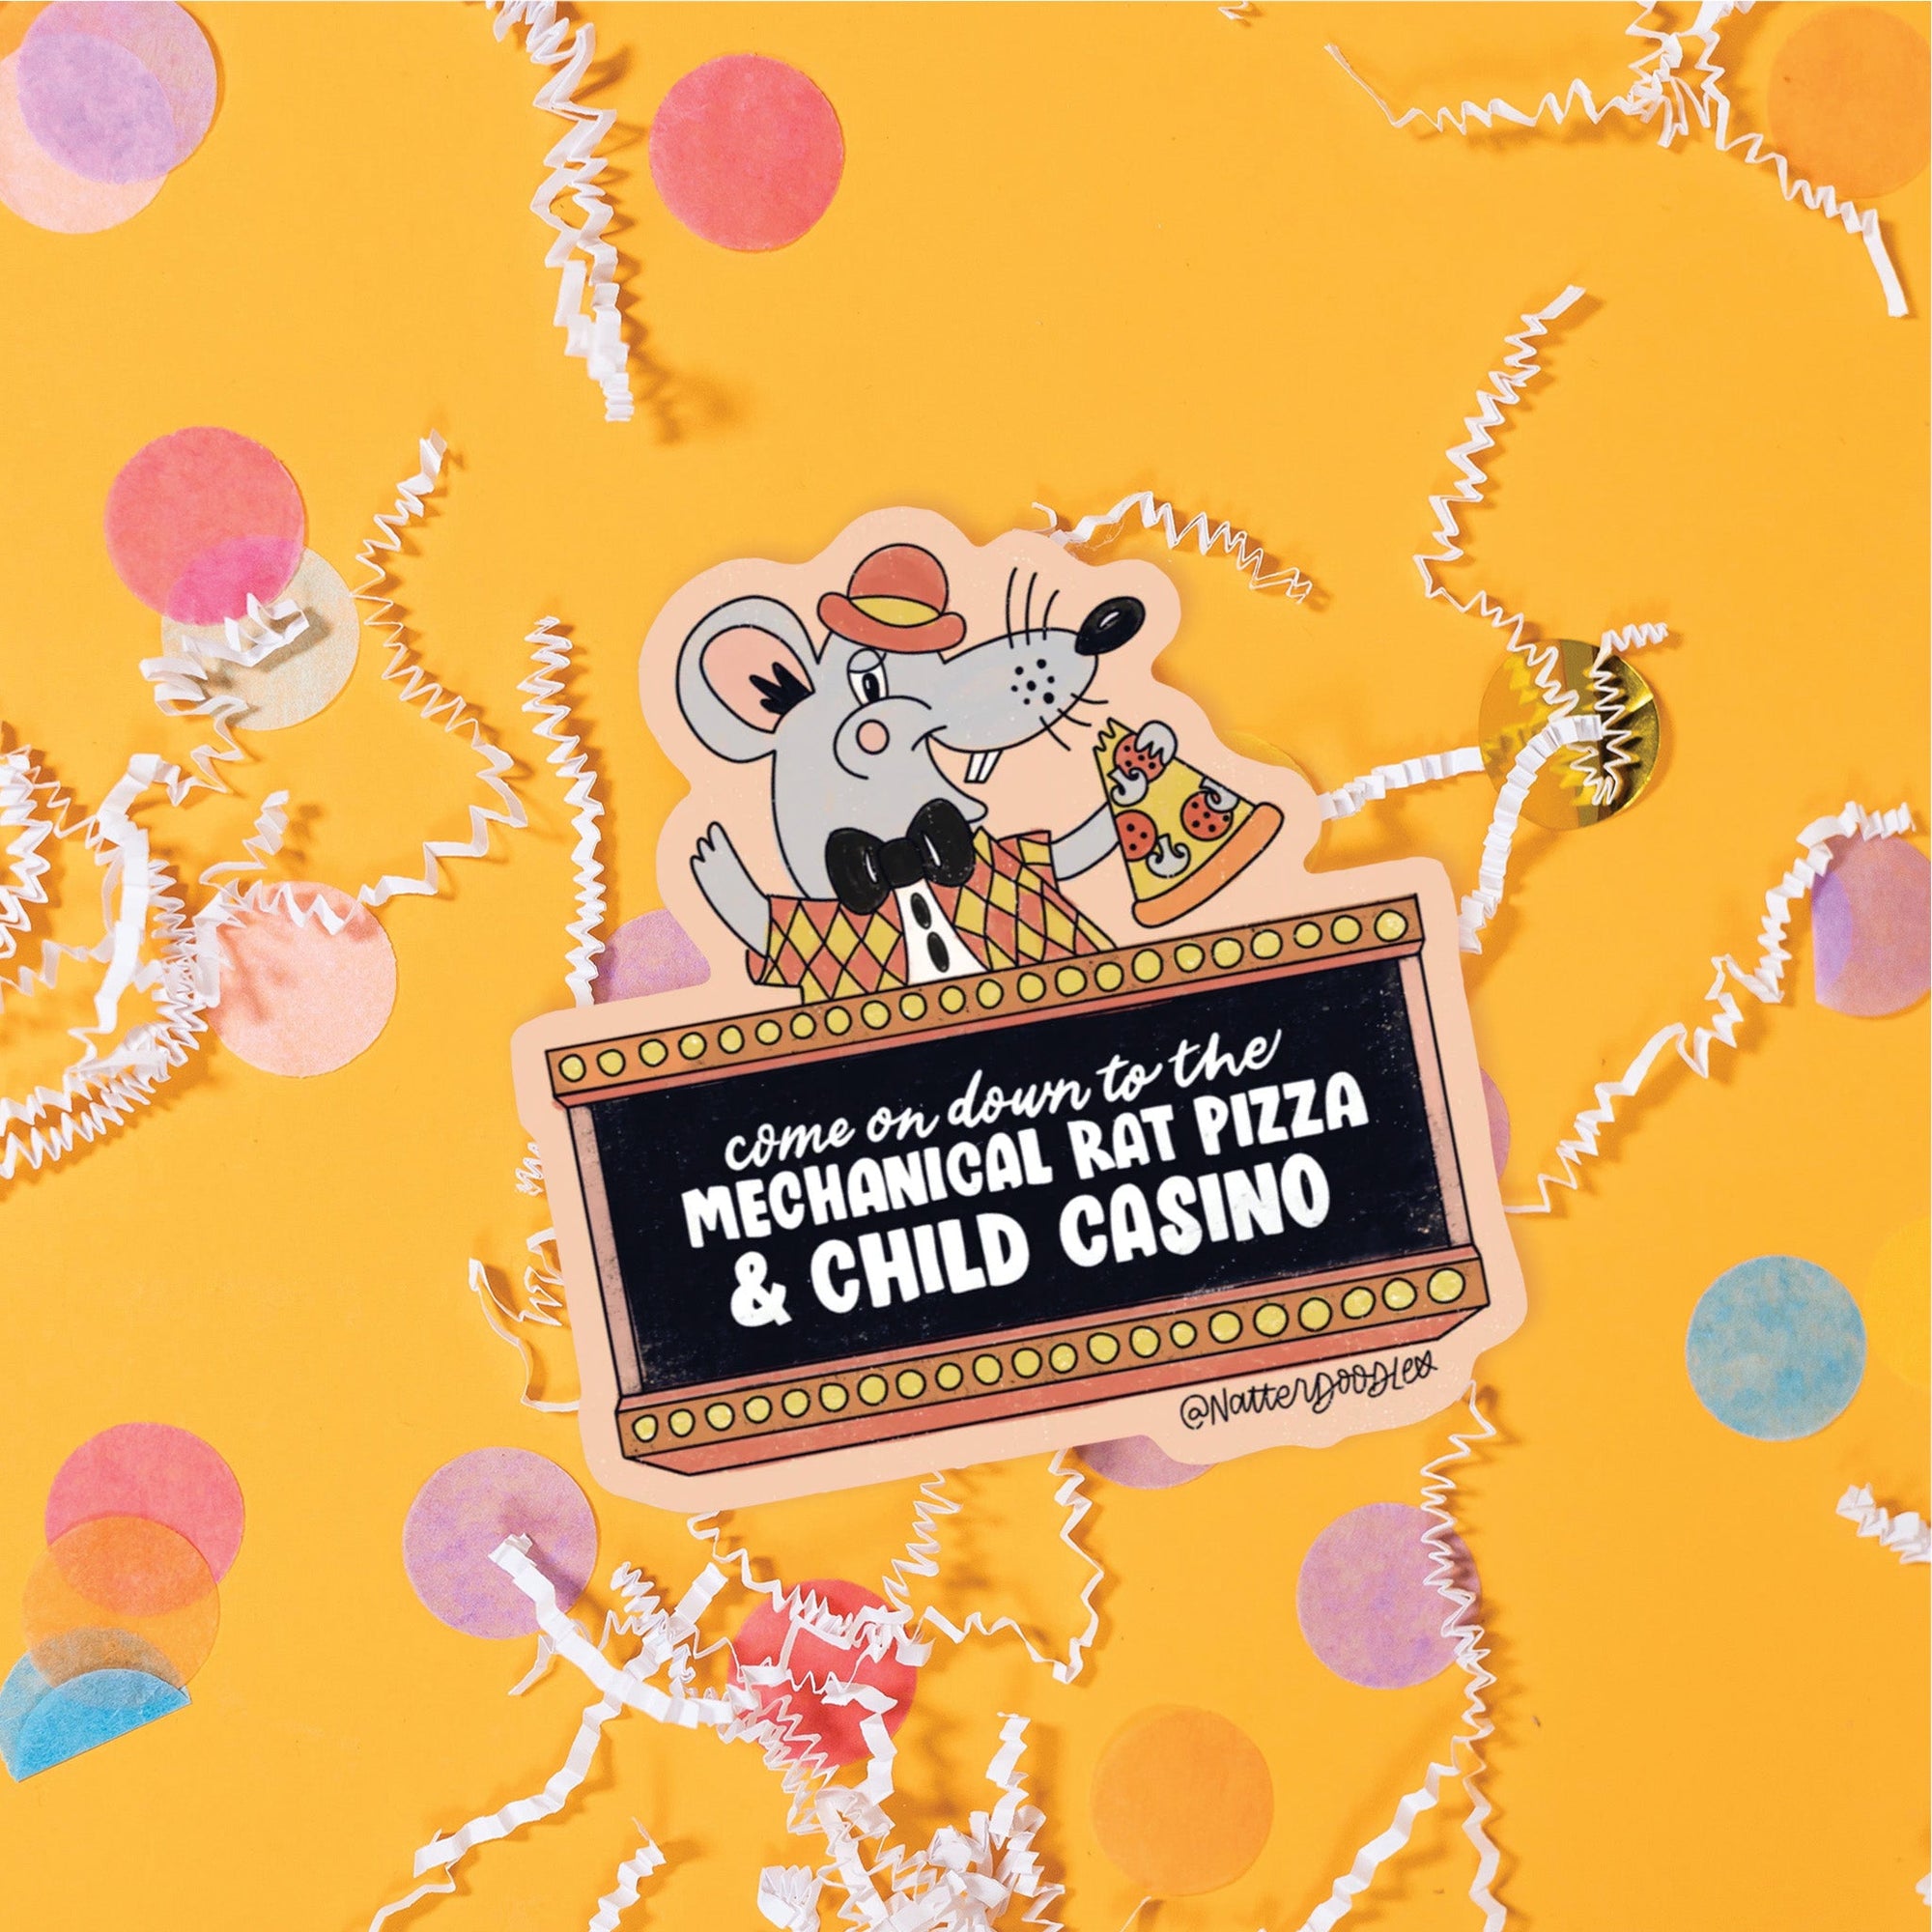 On a sunny mustard background sits a sticker with white crinkle and big, colorful confetti scattered around. This Chuck E. Cheese inspired colorful sticker has an illustration of a rat eating a slice of pizza above a black marquee with lights. It says "come on down to the MECHANICAL RAT PIZZA  & CHILD CASINO" in white handwritten lettering.